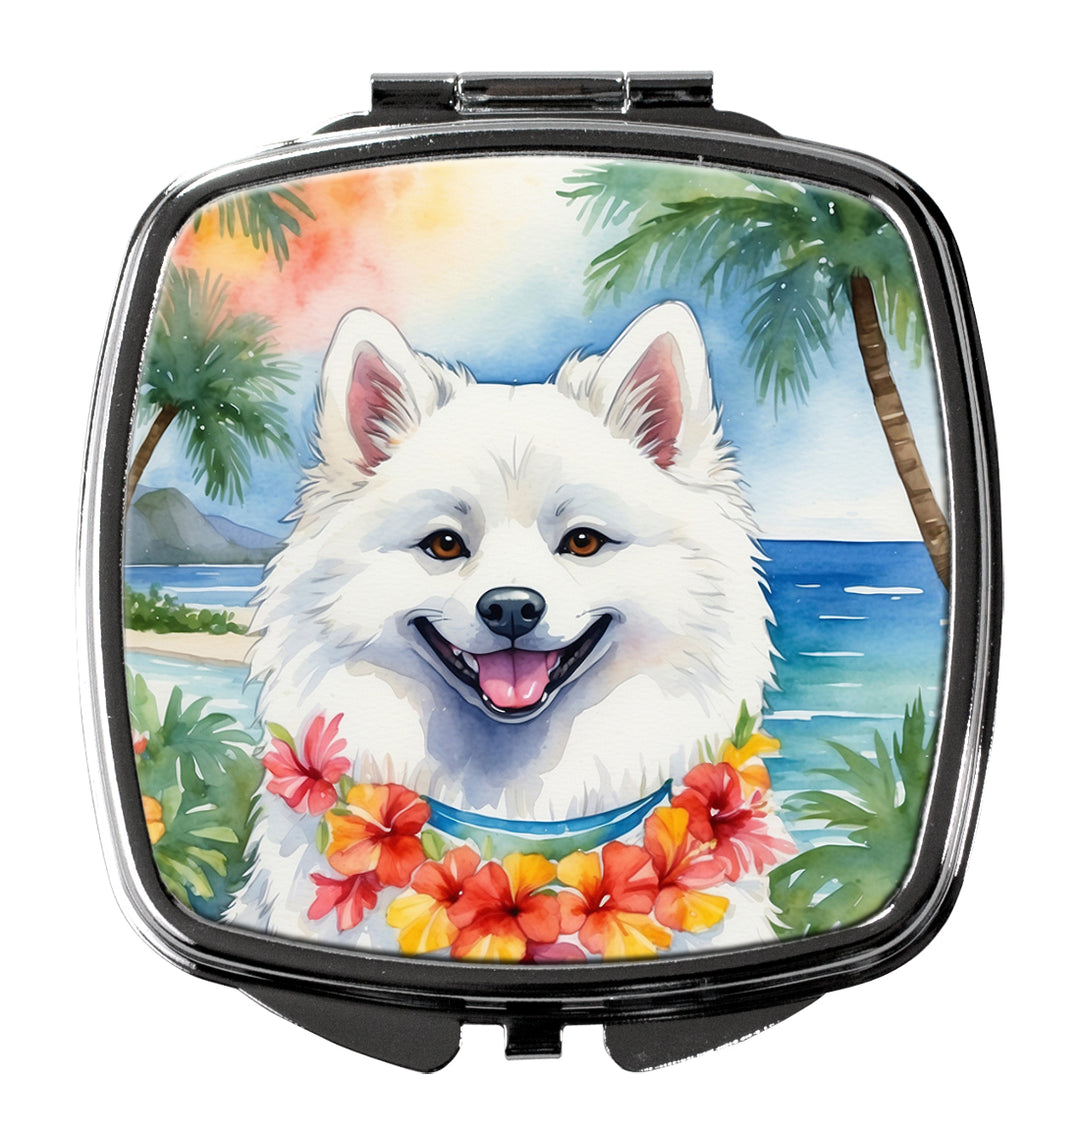 Yorkshire Terrier Luau Compact Mirror Image 9